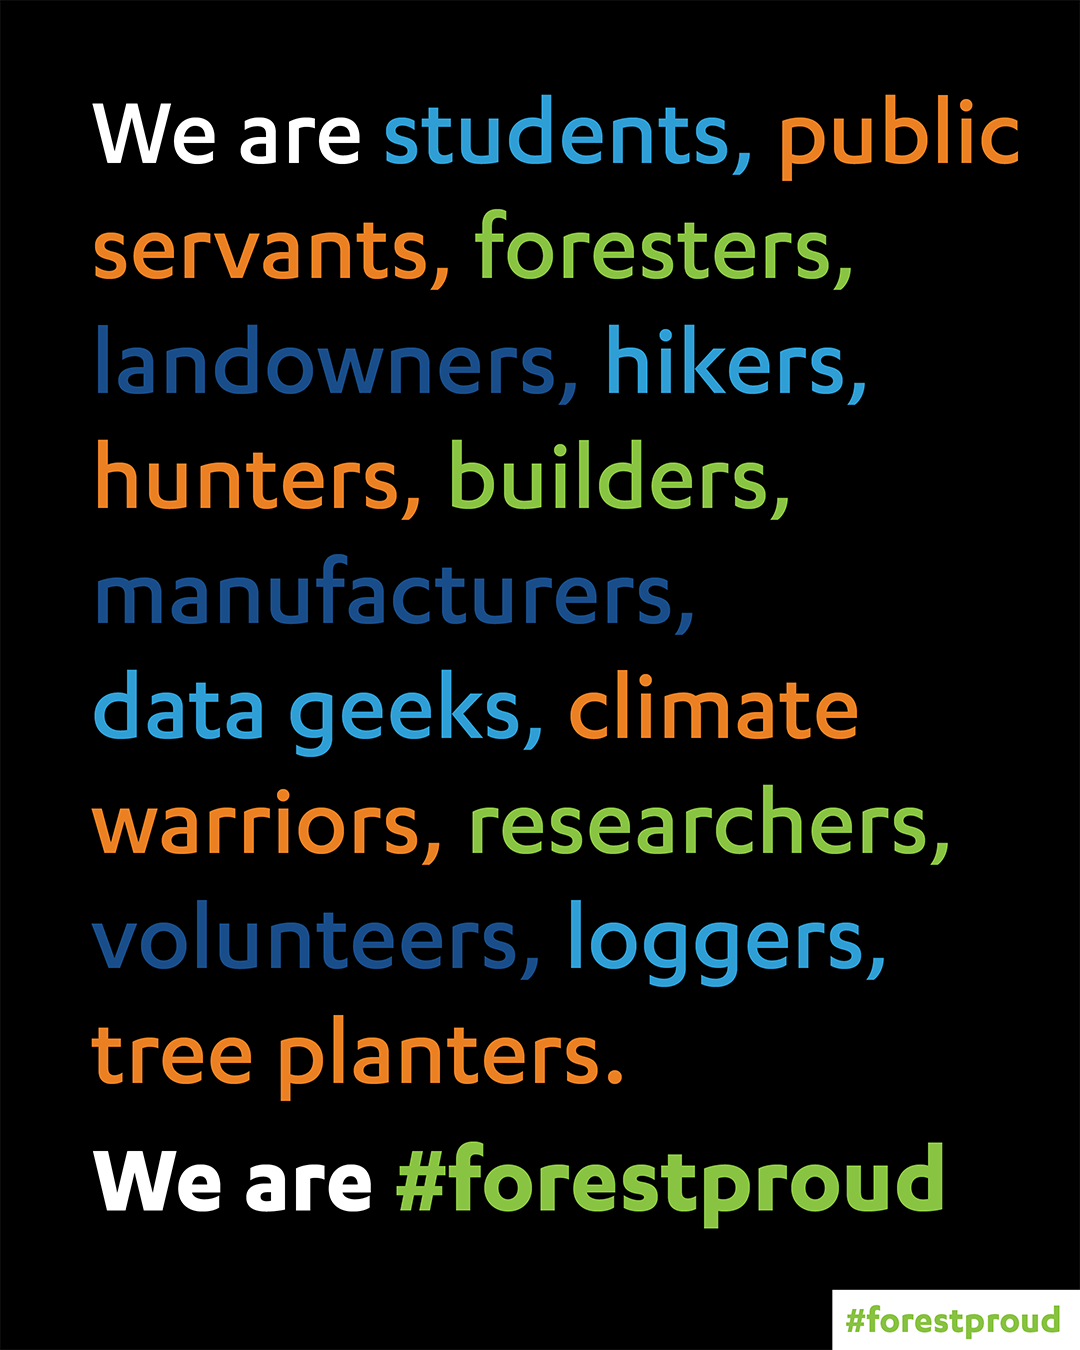 Forestproud's mission statement: "We are students, public servants, foresters, landowners, hikers, hunters, builders, manufacturers, data geeks, climate warriors, researchers, volunteers, loggers, tree planters. We are #forestproud.